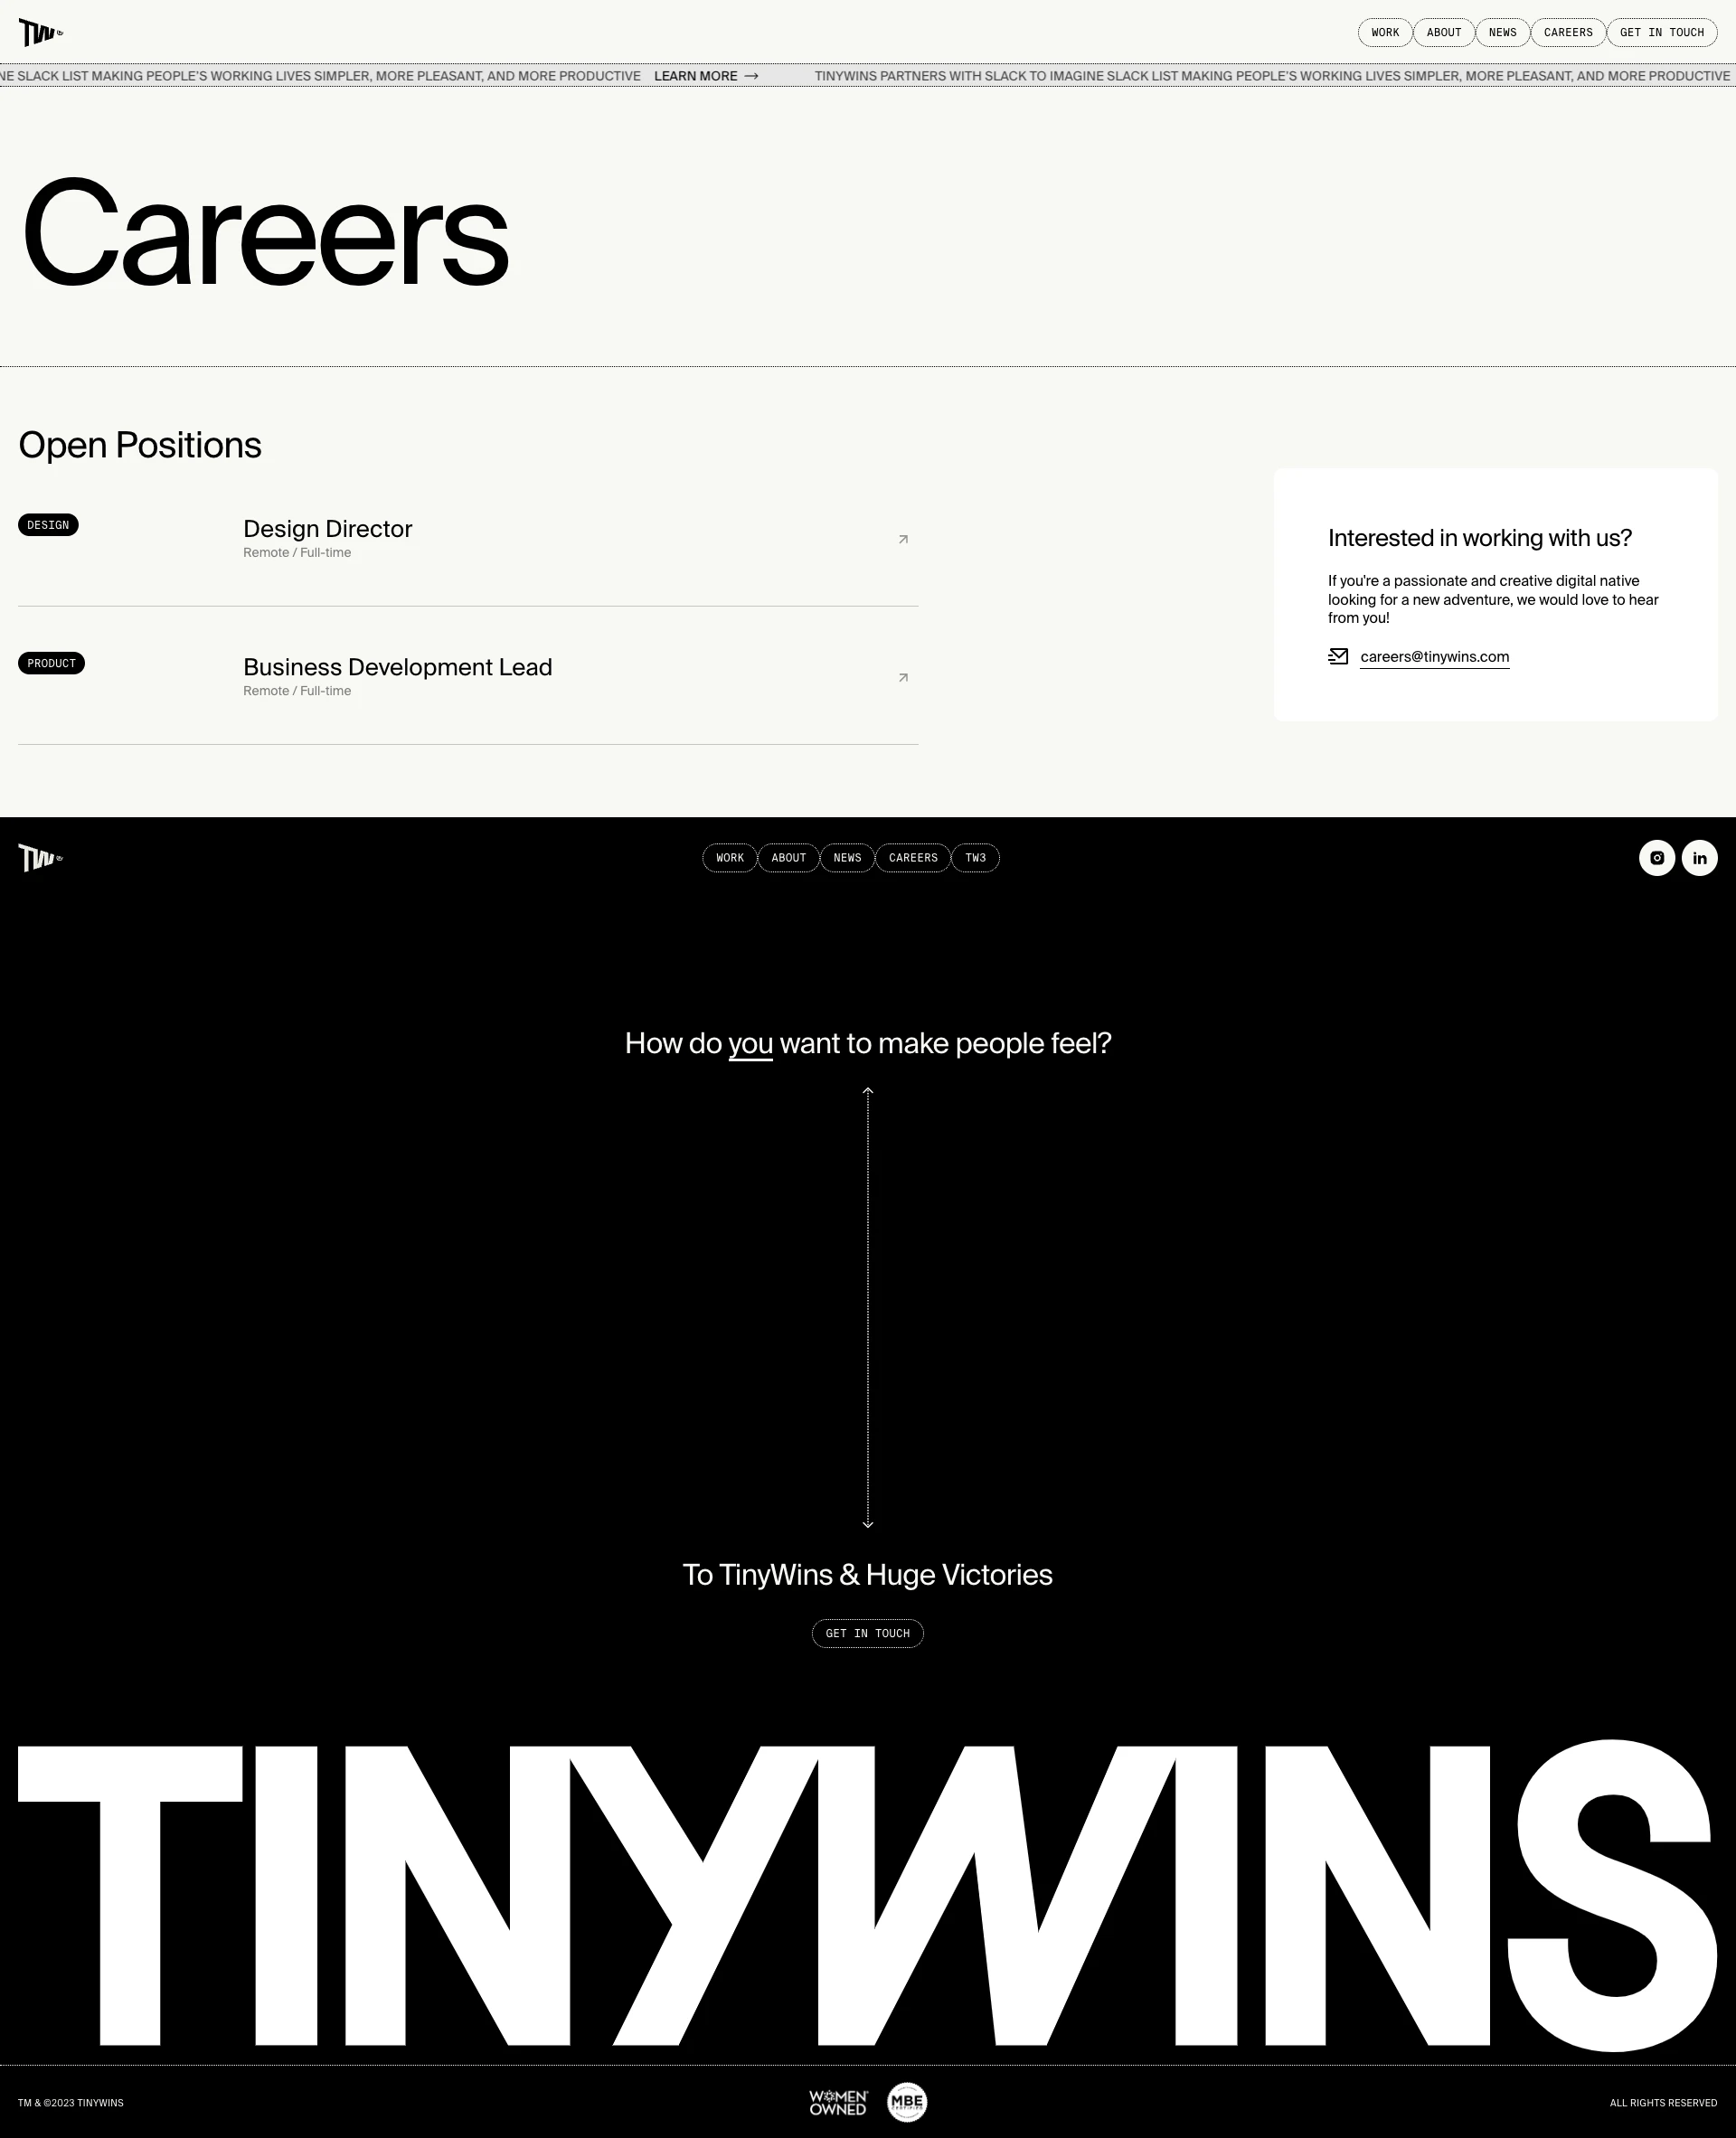 TinyWins Landing Page Example: We started small. One client at a time. Feeling by feeling. These early triumphs weren’t just victories; they were the stepping stones, the ‘Tiny Wins’ that propelled us forward, instilling in us a momentum that still drives us today.